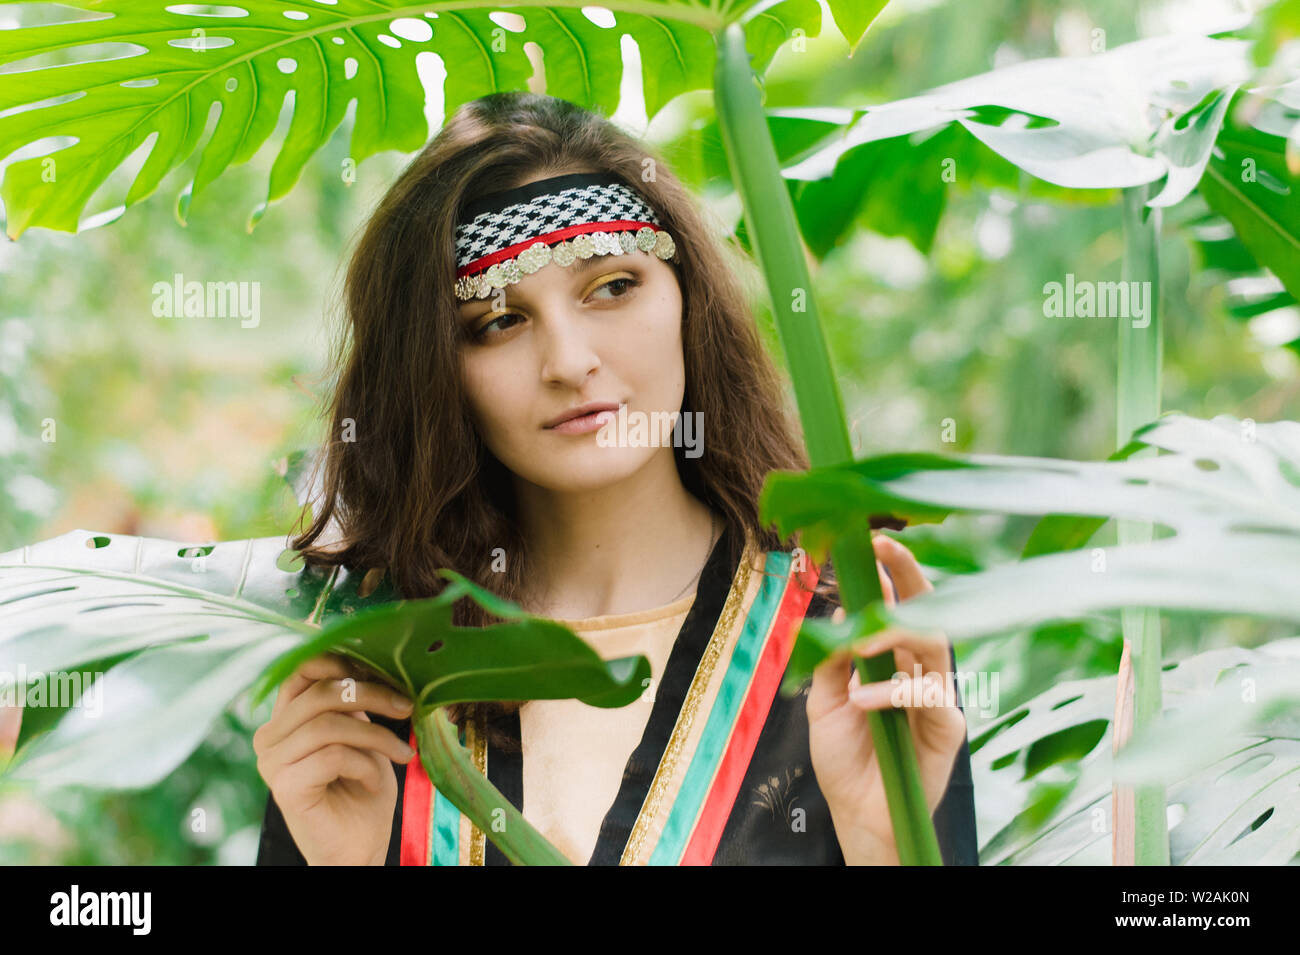 The girl from Jordan on the background of plants and palm leaves ...